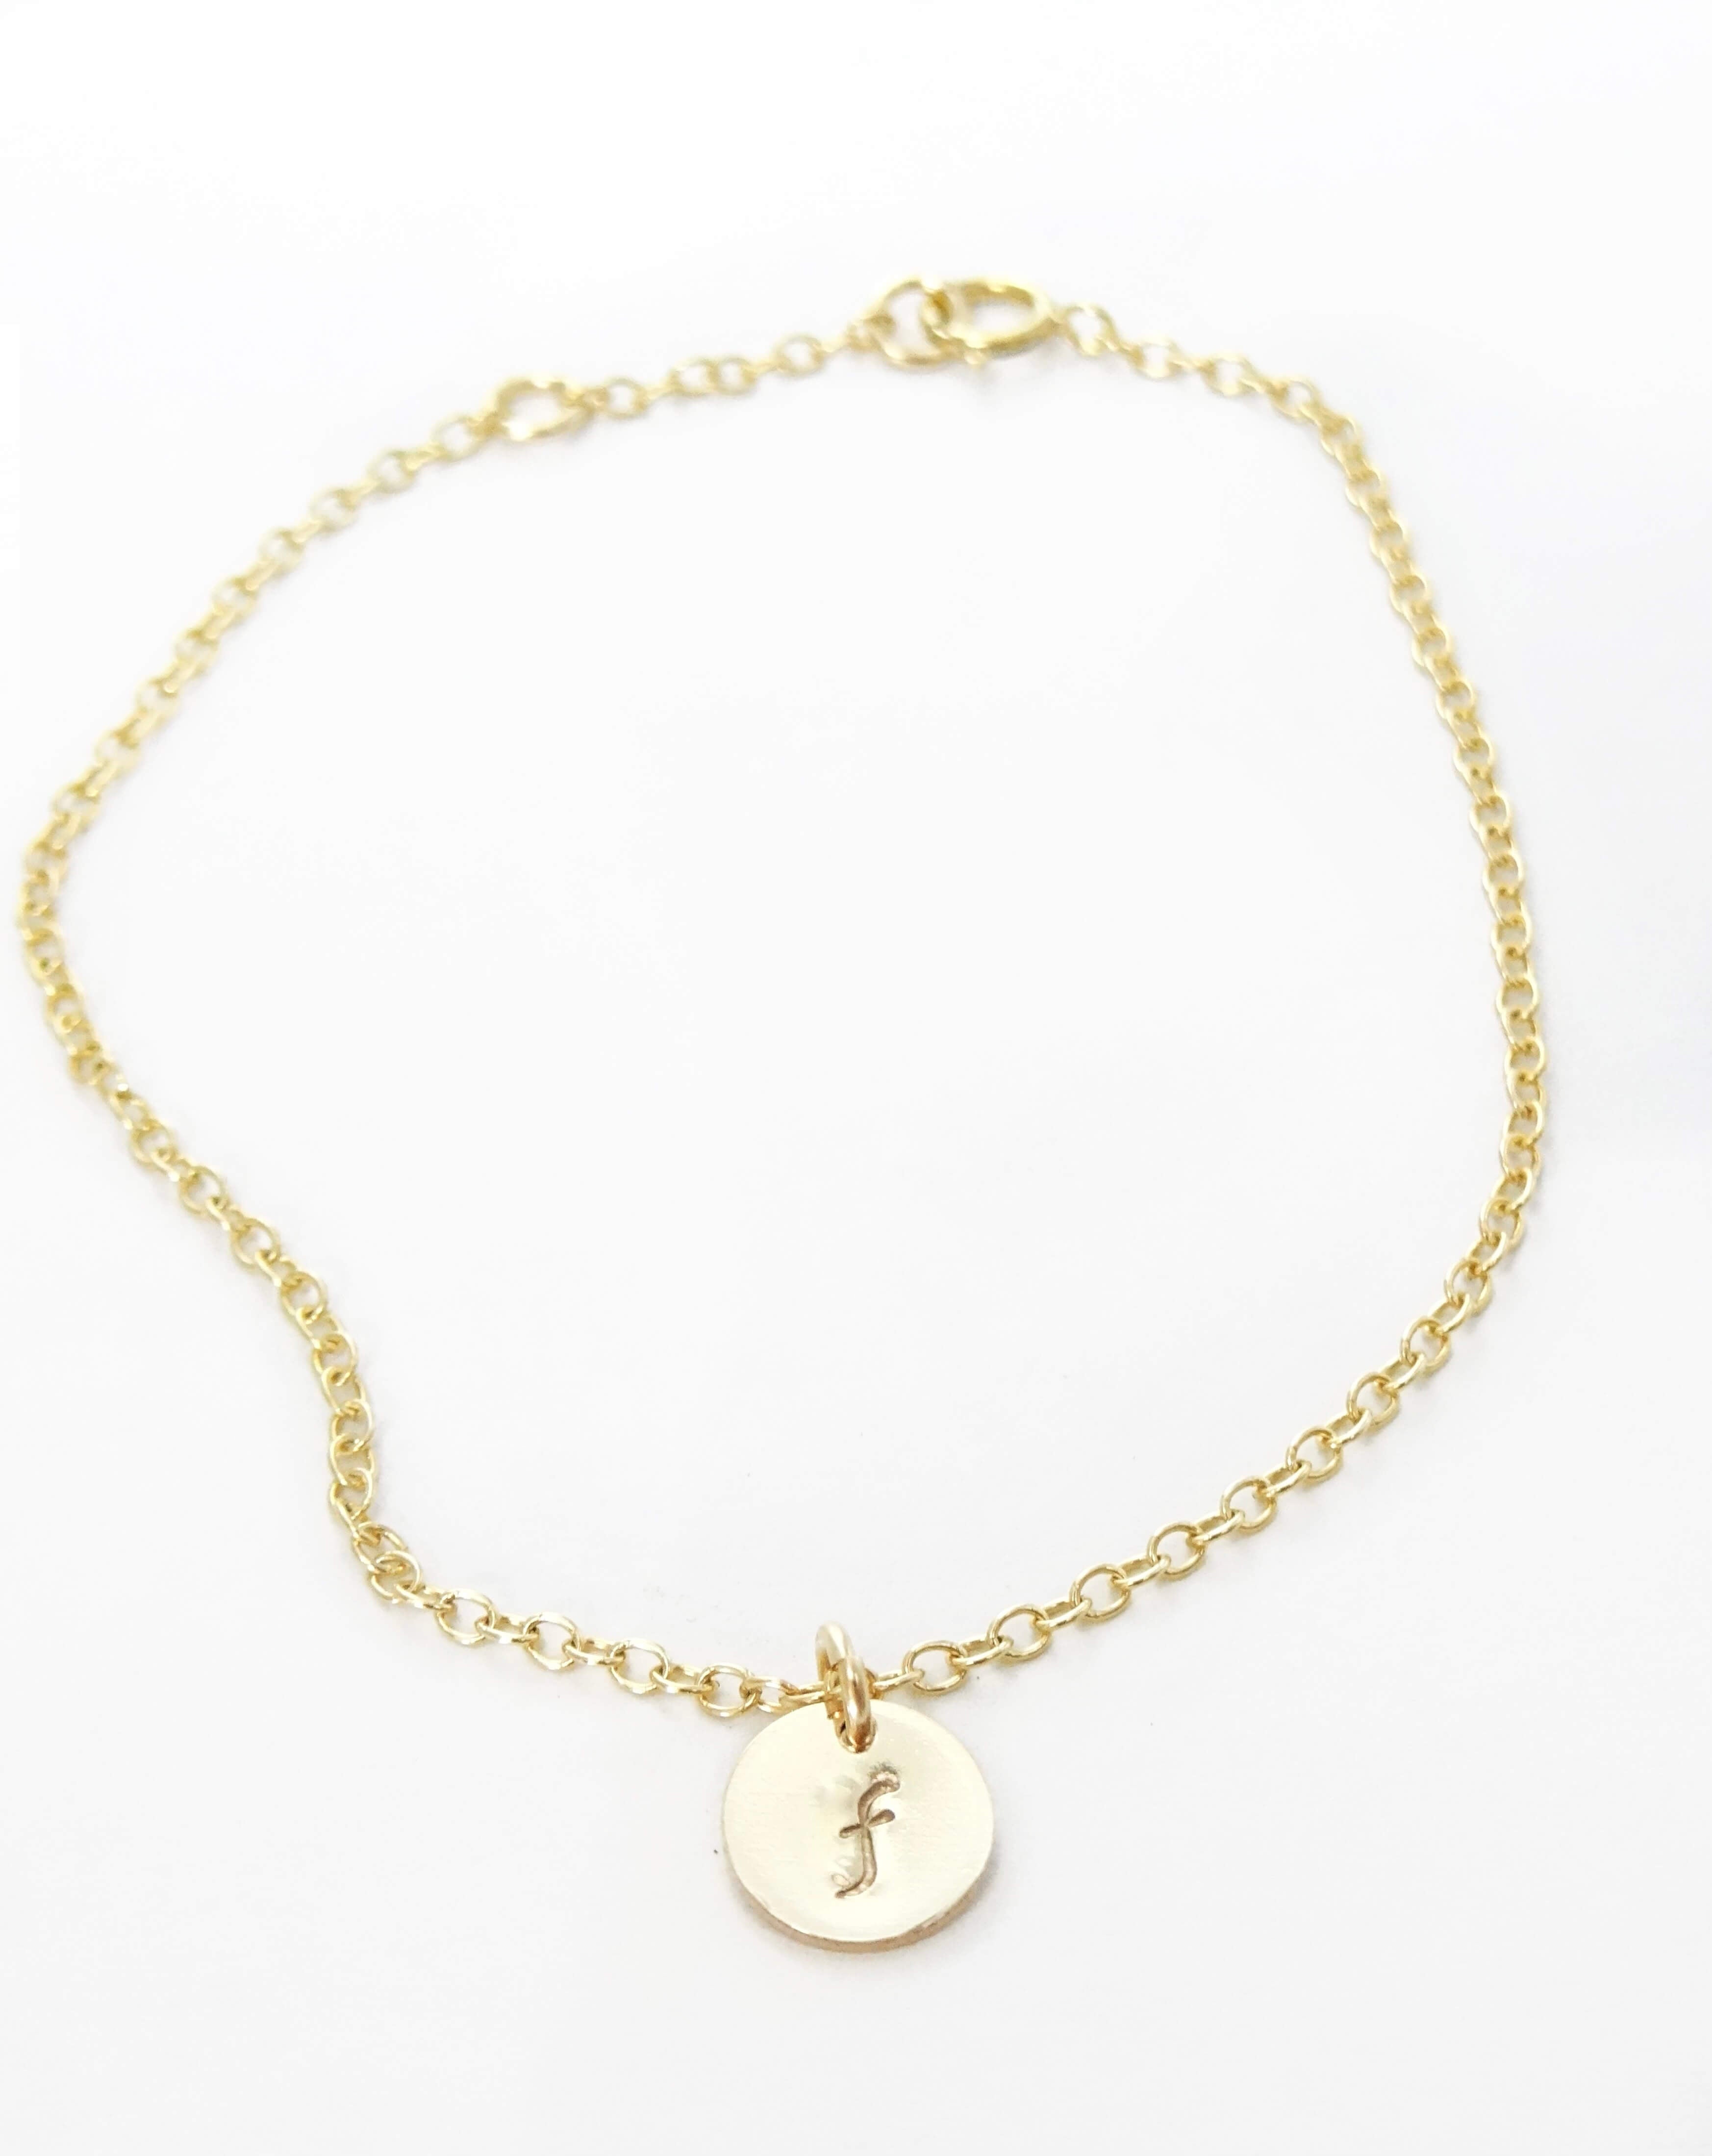 zivanora gold filled personalized initial charm chain bracelet